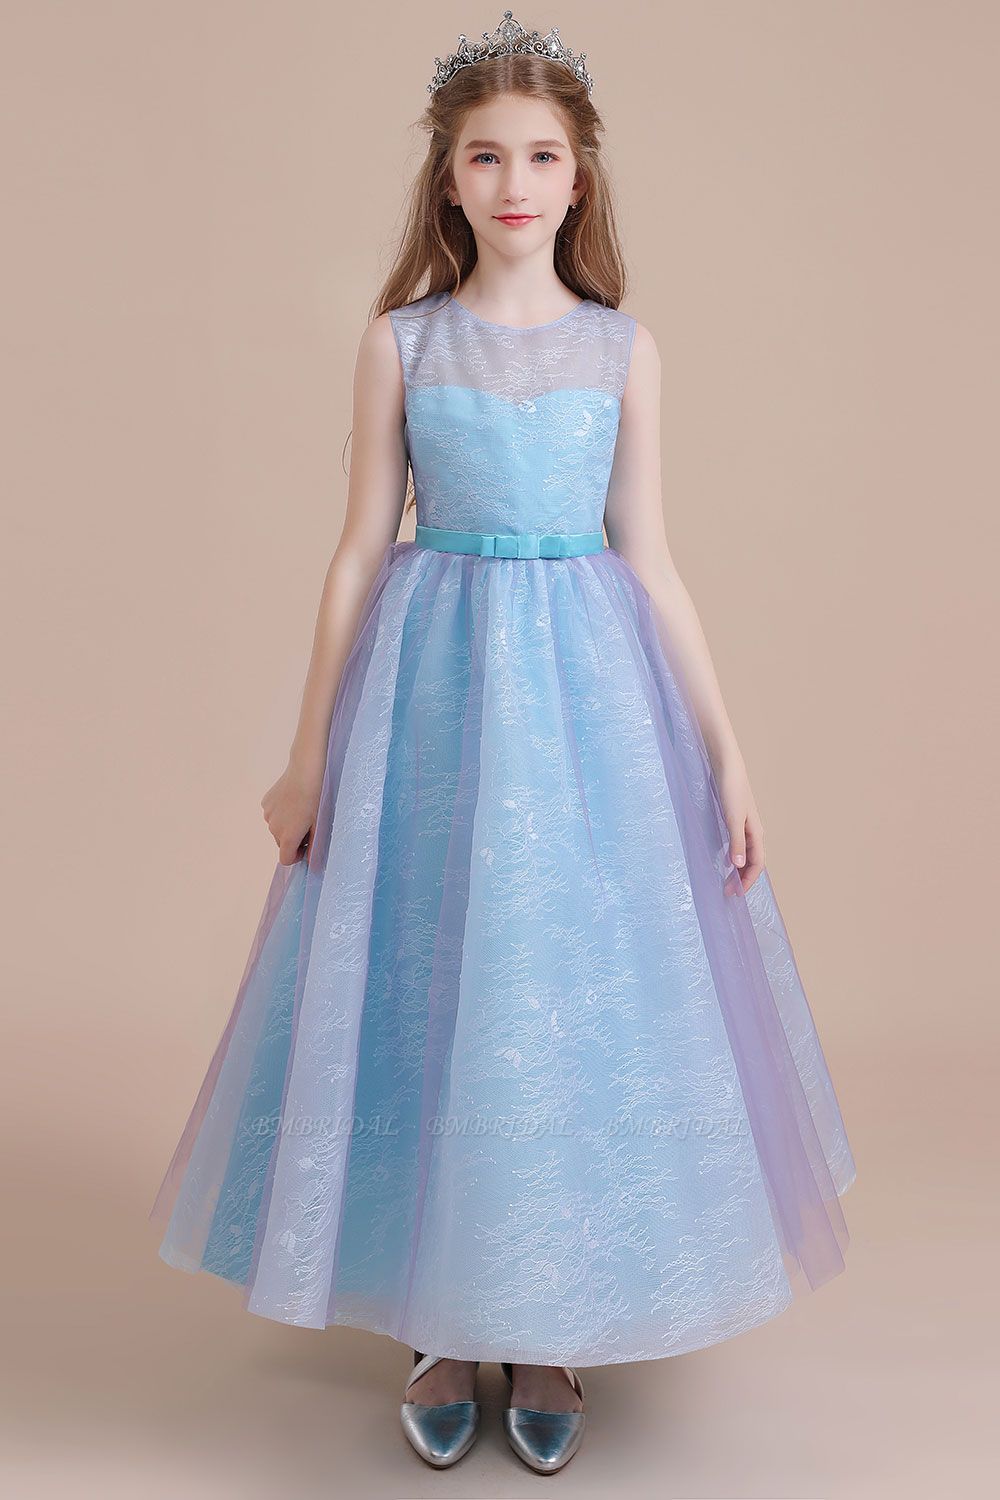 BMbridal A-Line Illusion Lace Tulle Flower Girl Dress Online